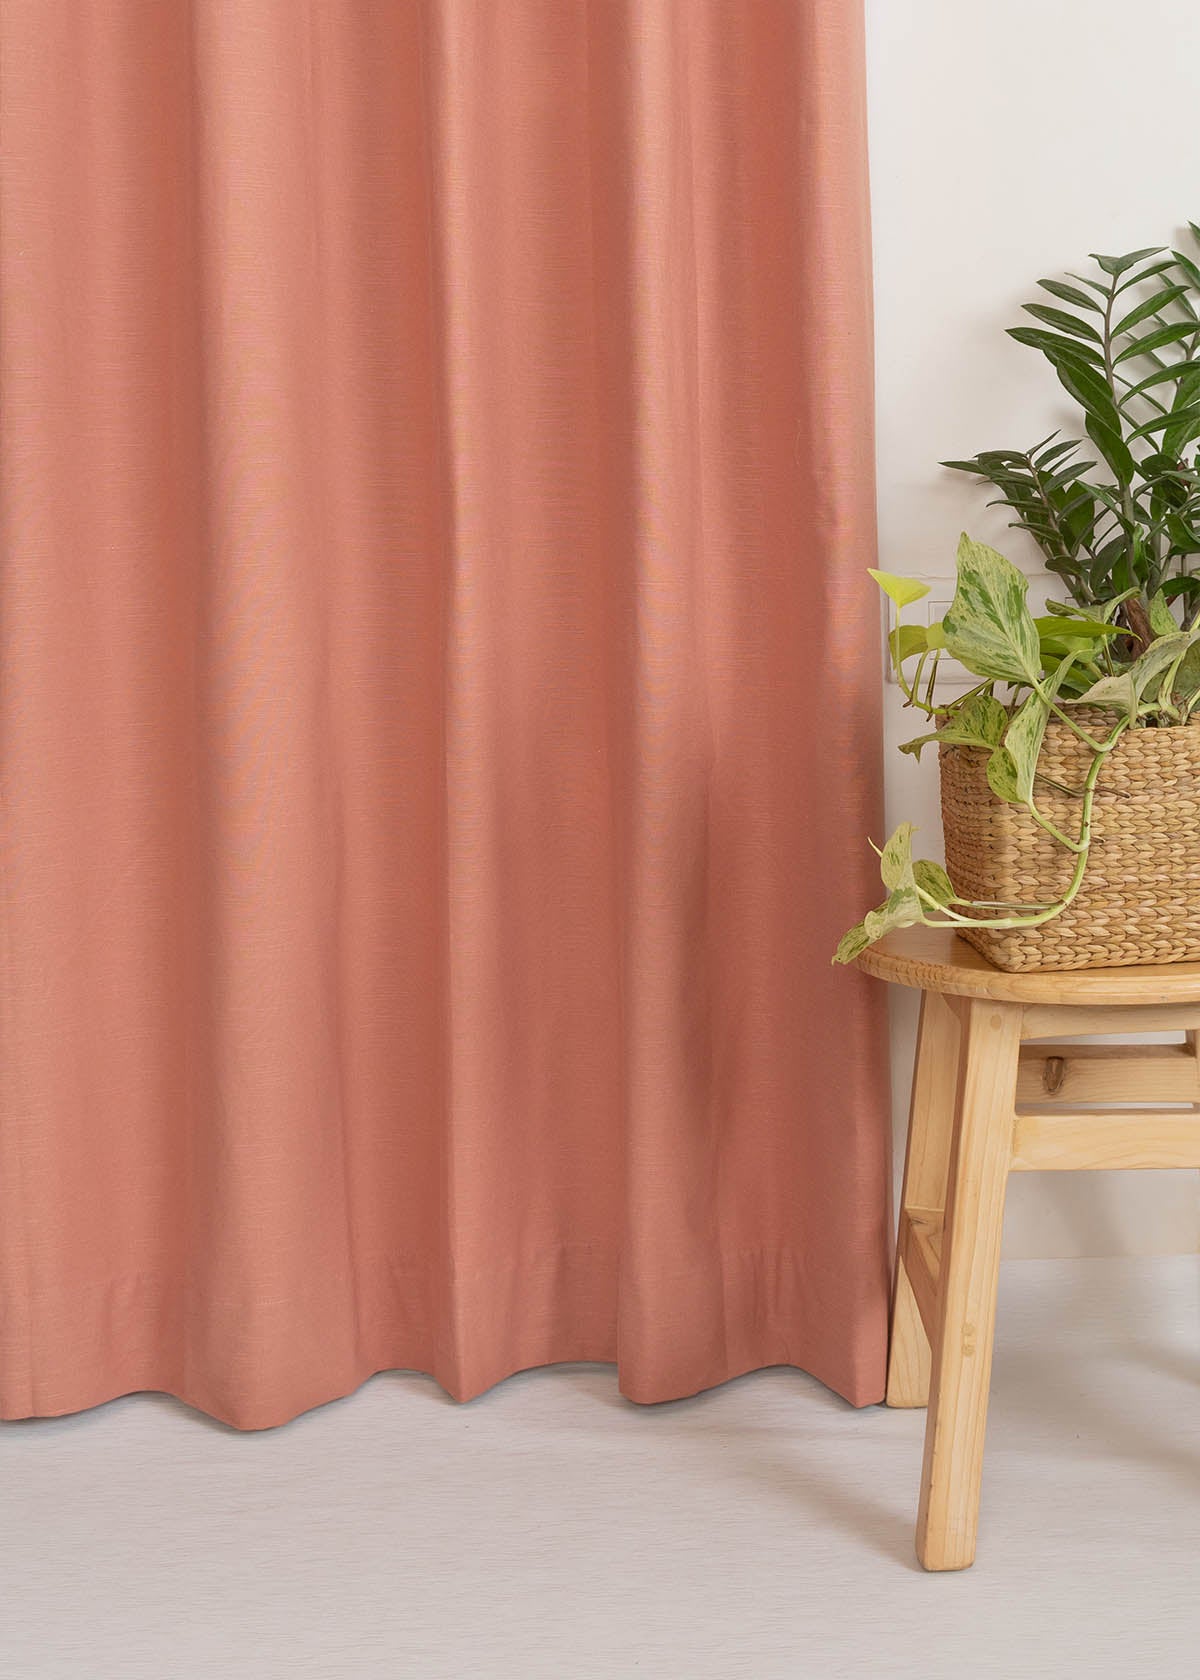 Solid Rust 100% cotton plain curtain for bedroom - Room darkening - Pack of 1